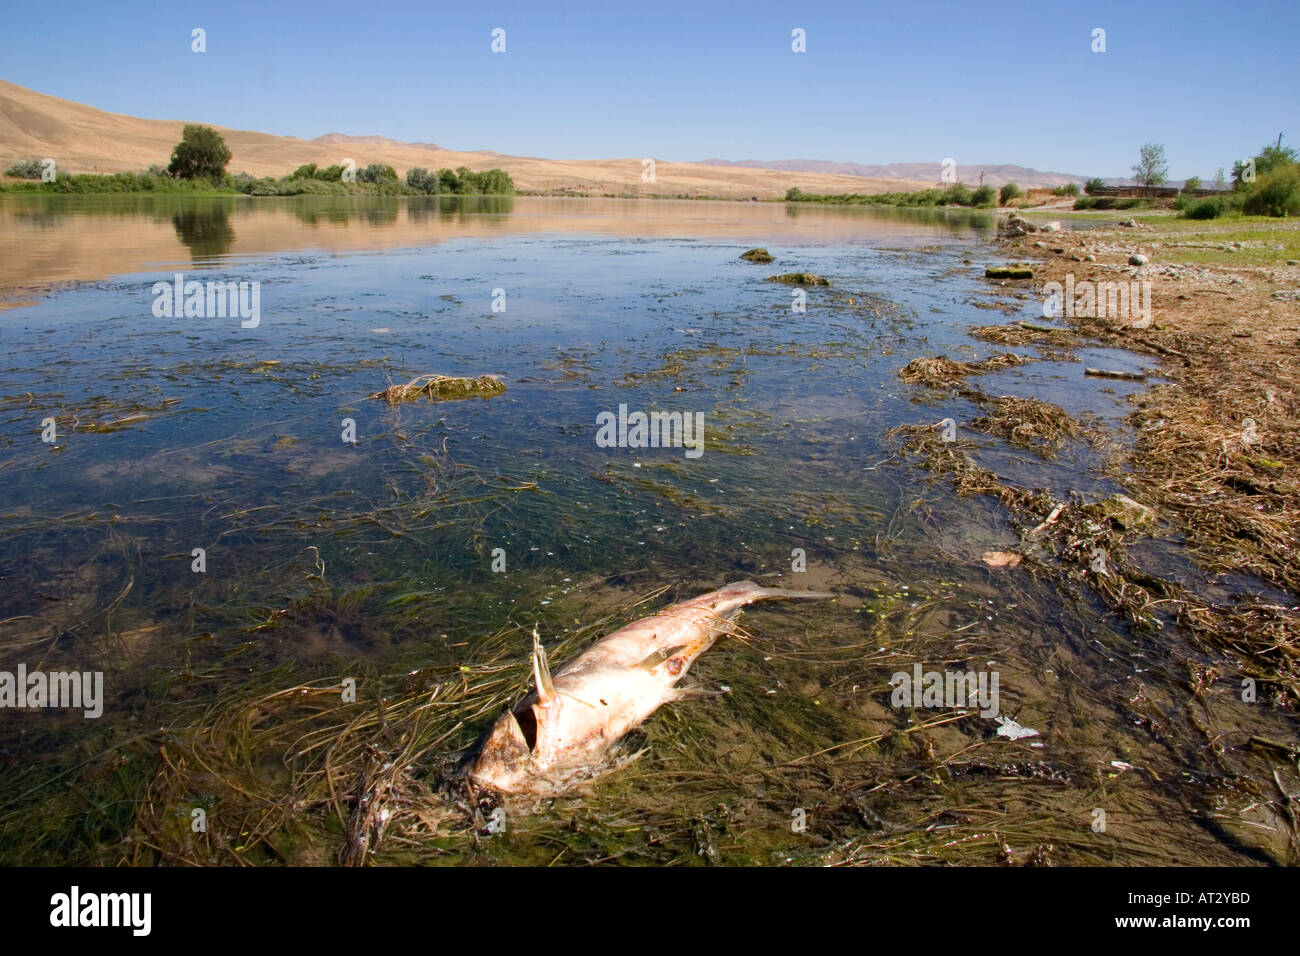 Fish kill on the Snake River in Idaho. Catfish died from pollution and environmental causes. Stock Photo